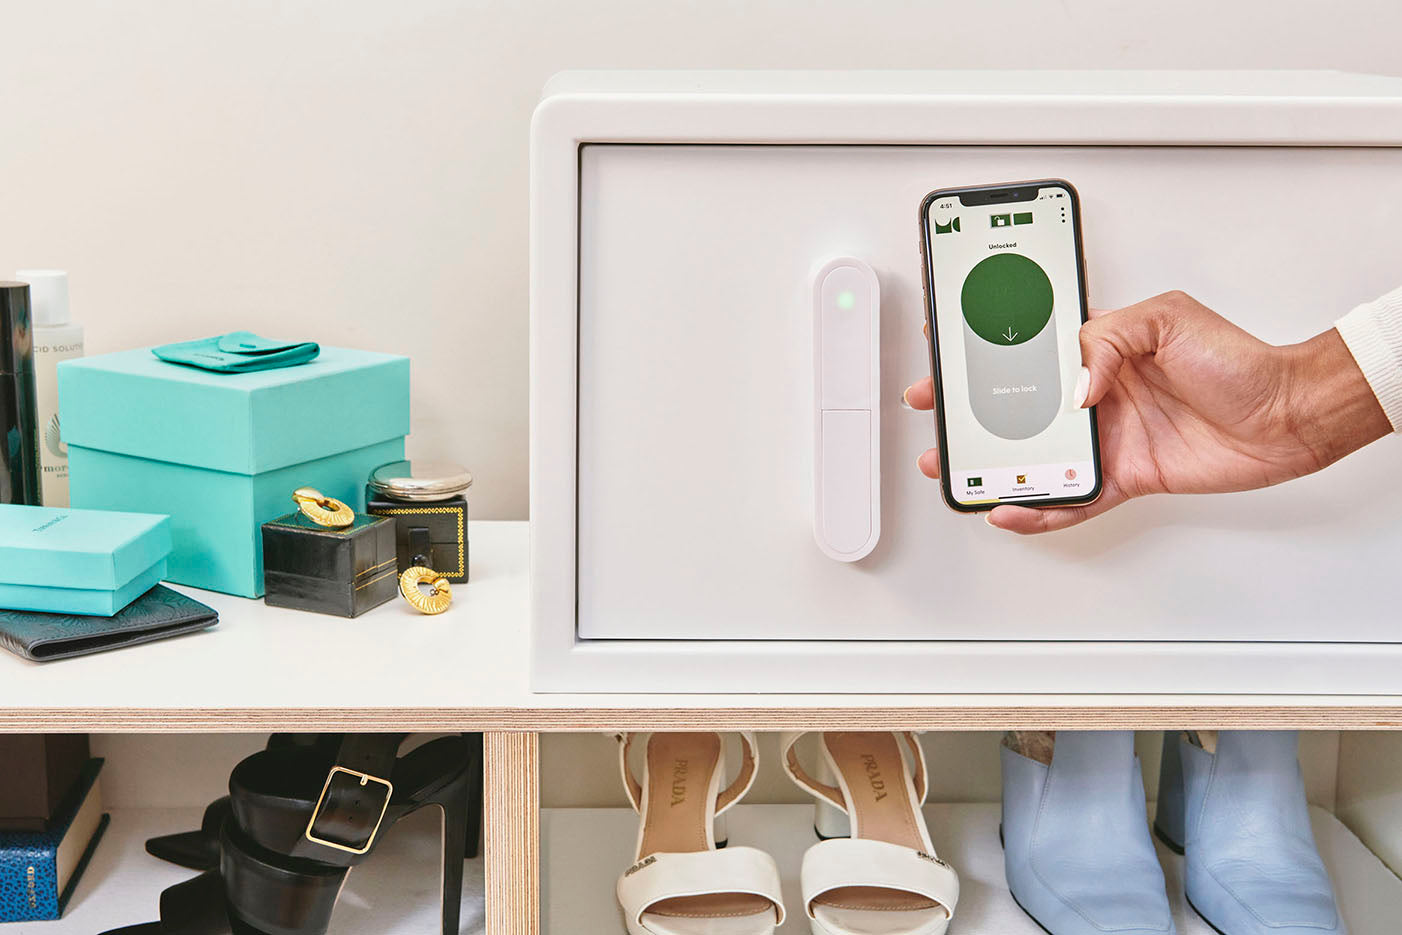 A white iCube sitting on top of a shelf with a hand holding a phone to show the iCube app. On the screen, the app is prompting them to slide to lock the safe.